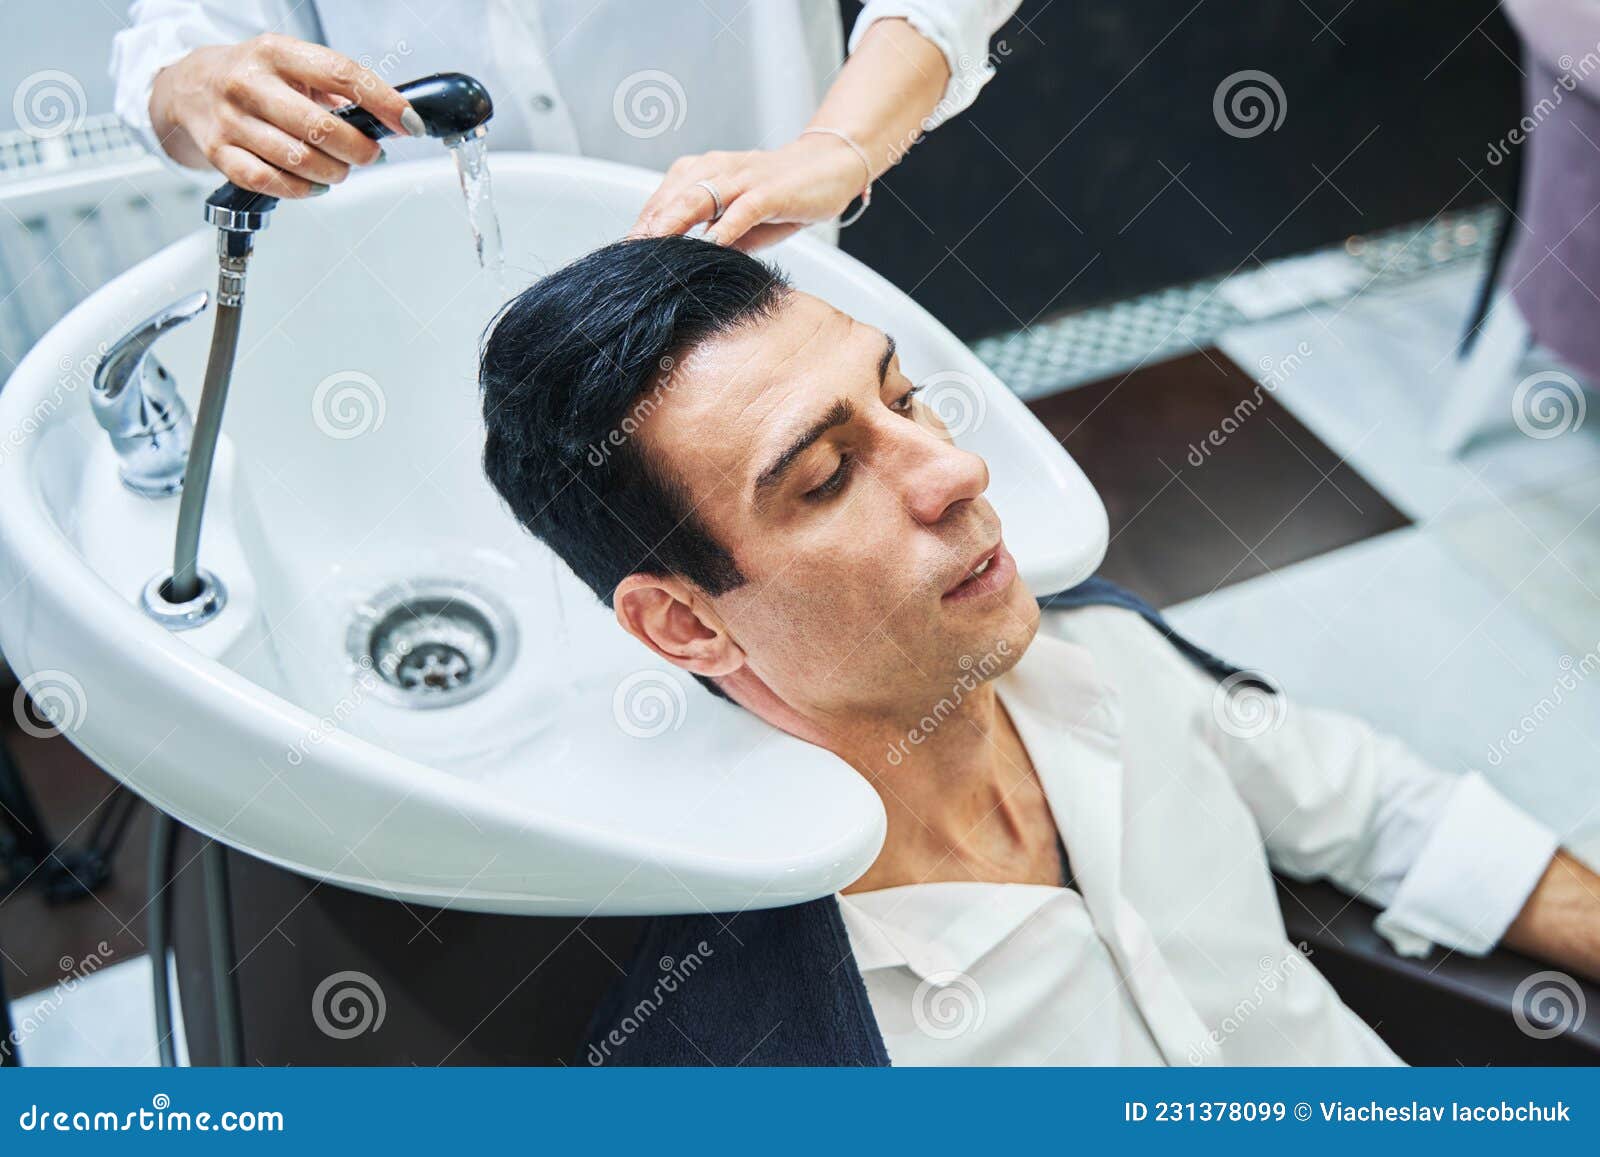 Beautician Washing Man Hair in Wash Sink Stock Image - Image of salon,  male: 231378099